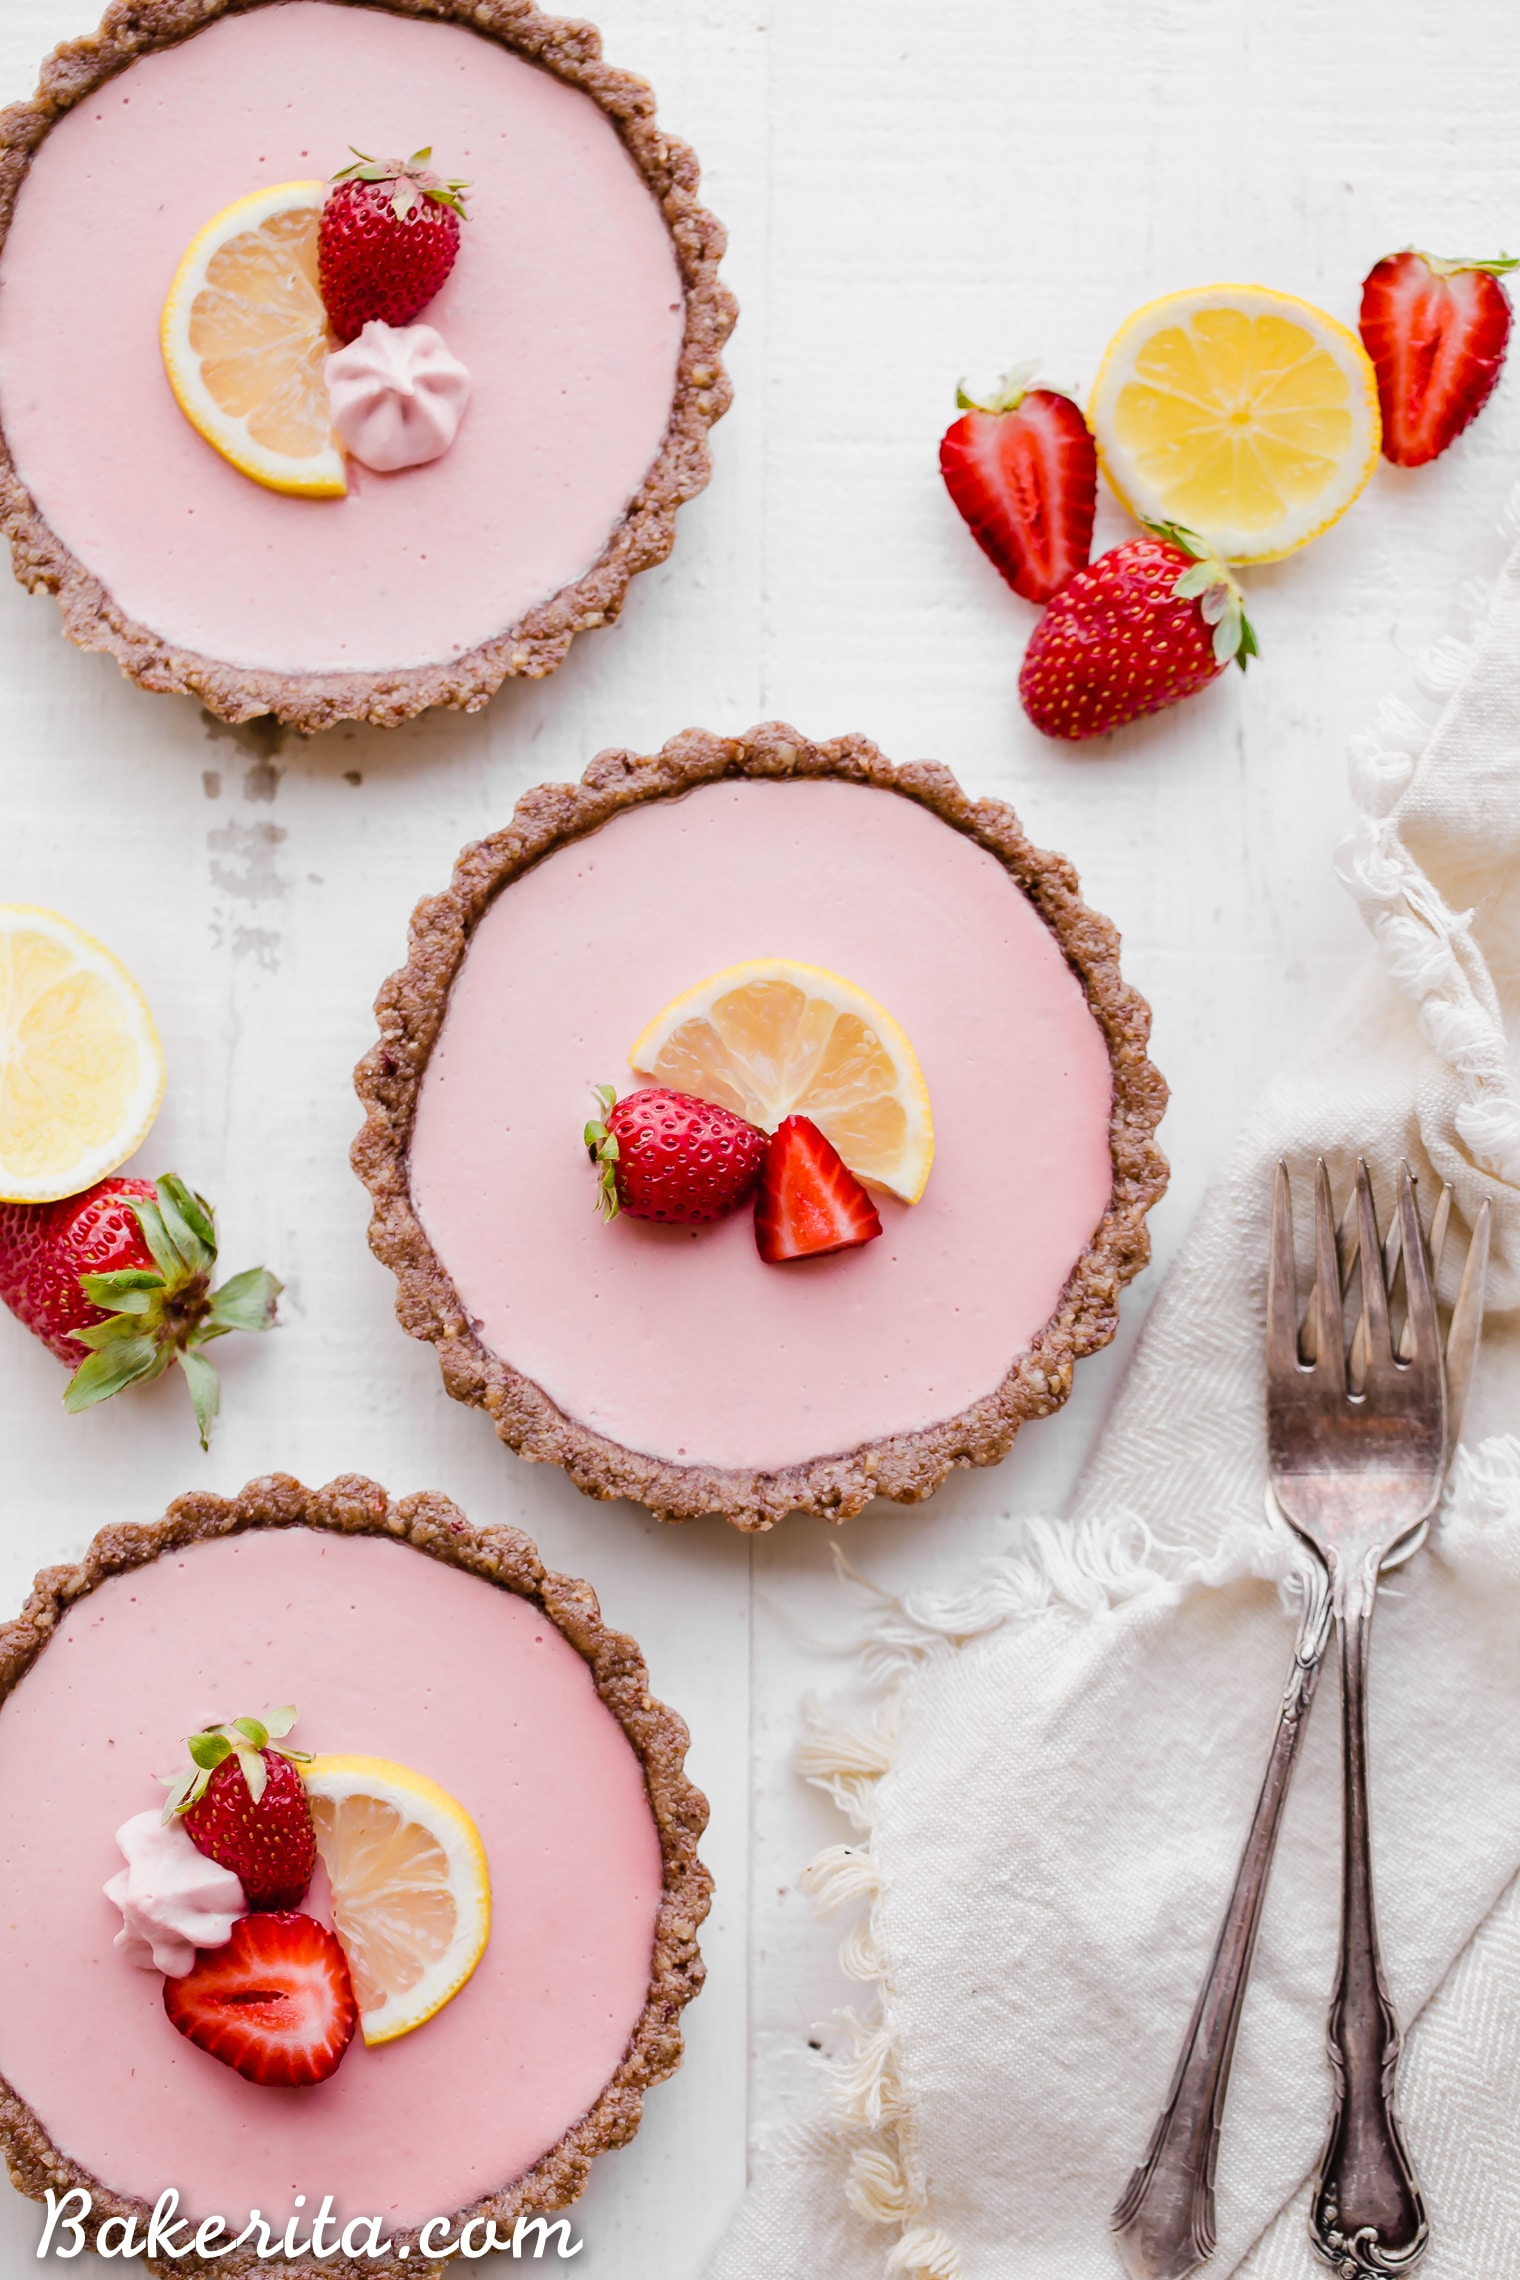 These No Bake Strawberry Lemonade Tarts have a raw "graham cracker" style crust filled with a super refreshing strawberry lemonade filling. These are SO good frozen on a hot day and they're gluten-free, paleo and vegan.